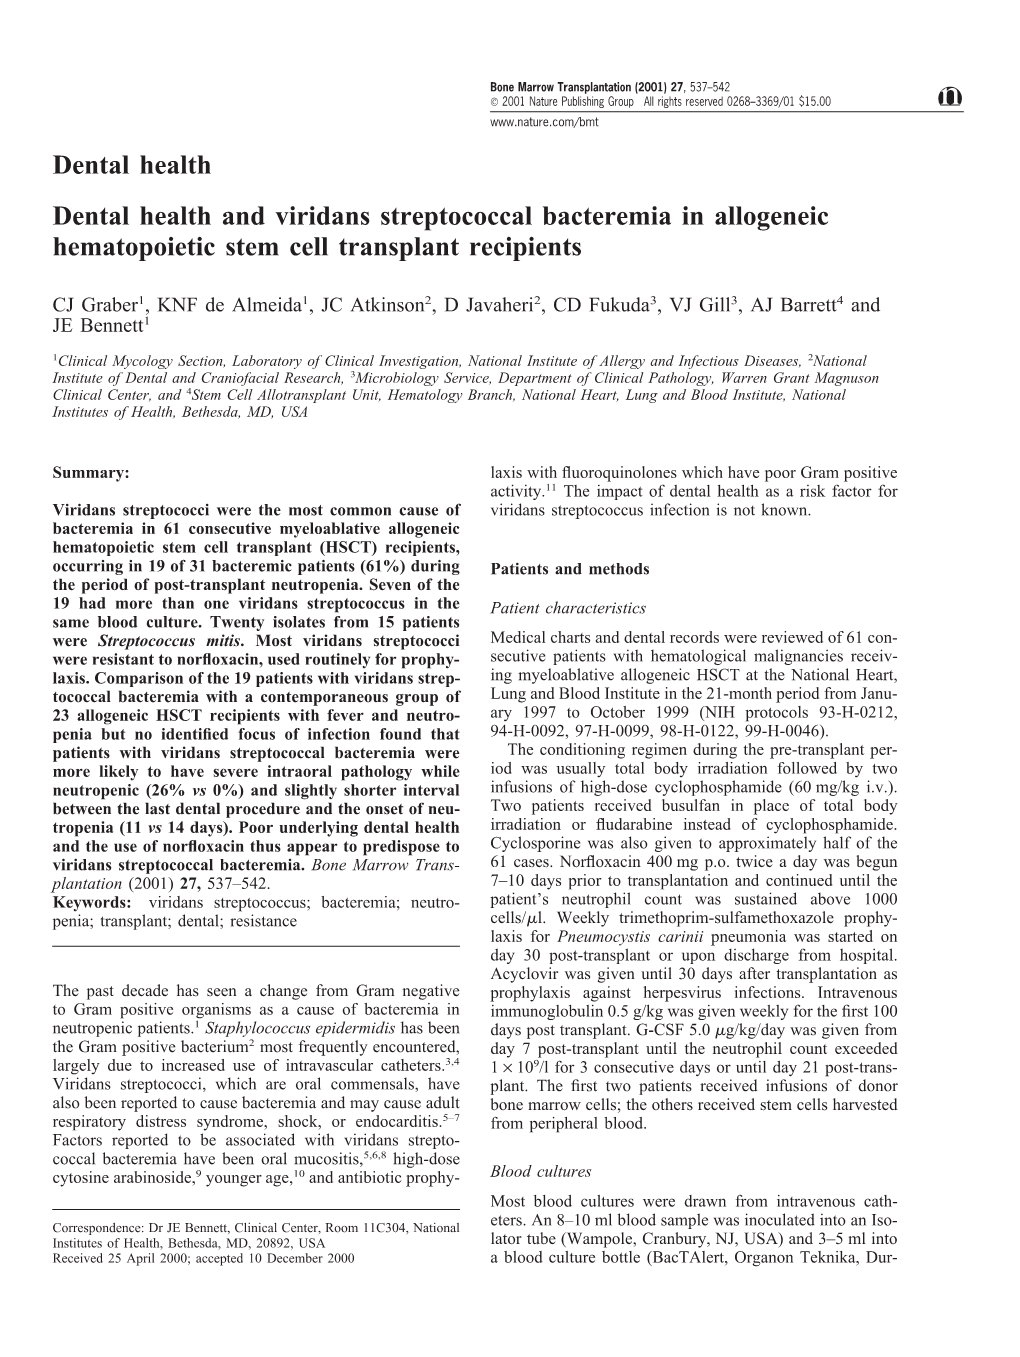 Dental Health Dental Health and Viridans Streptococcal Bacteremia in Allogeneic Hematopoietic Stem Cell Transplant Recipients